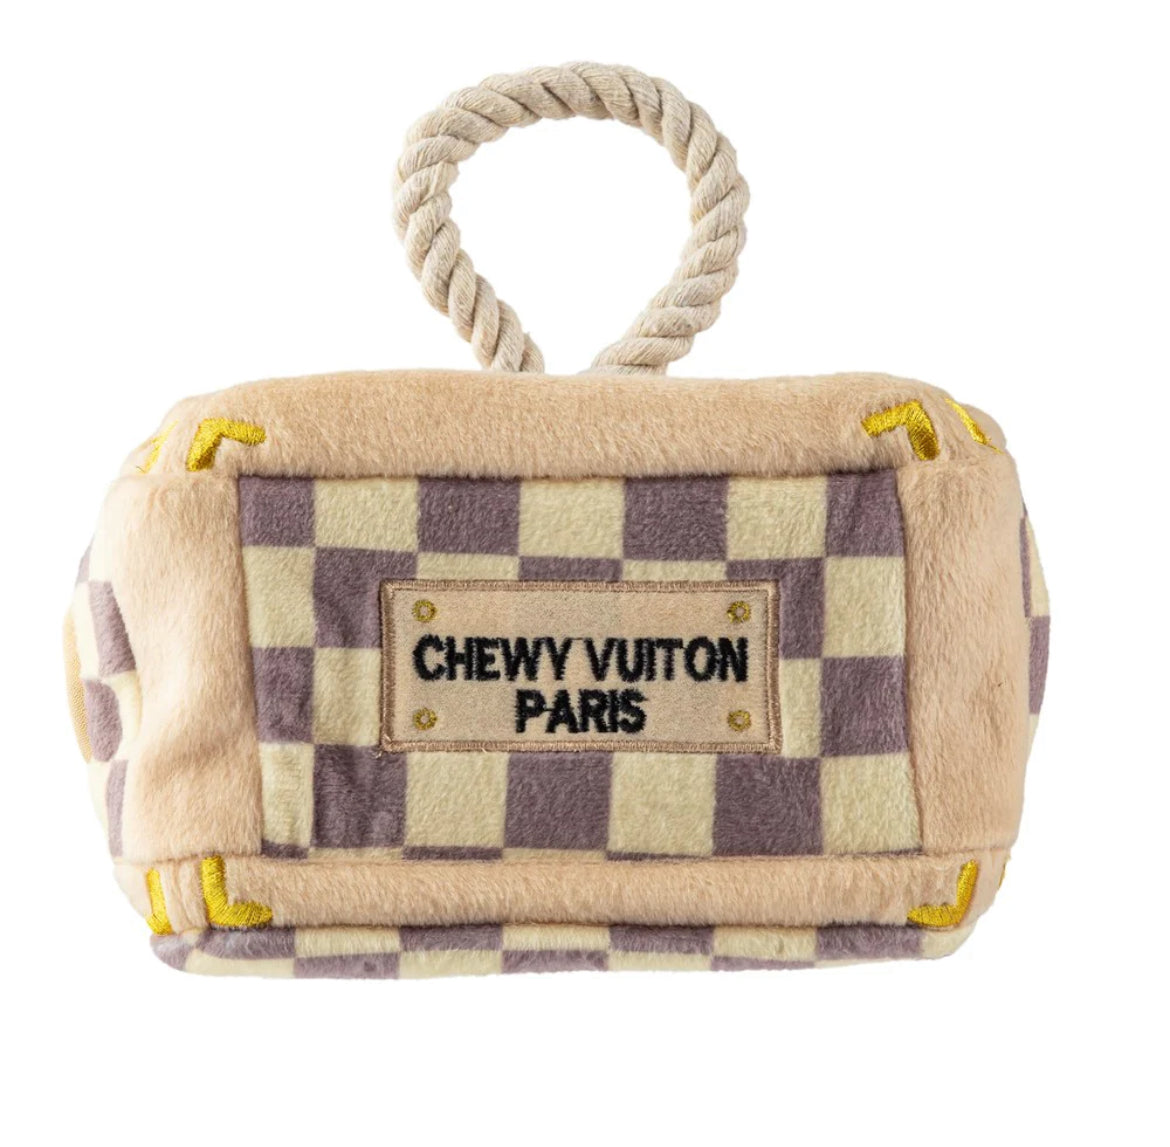 Checkered Chewy Vuiton Trunk – Activity House